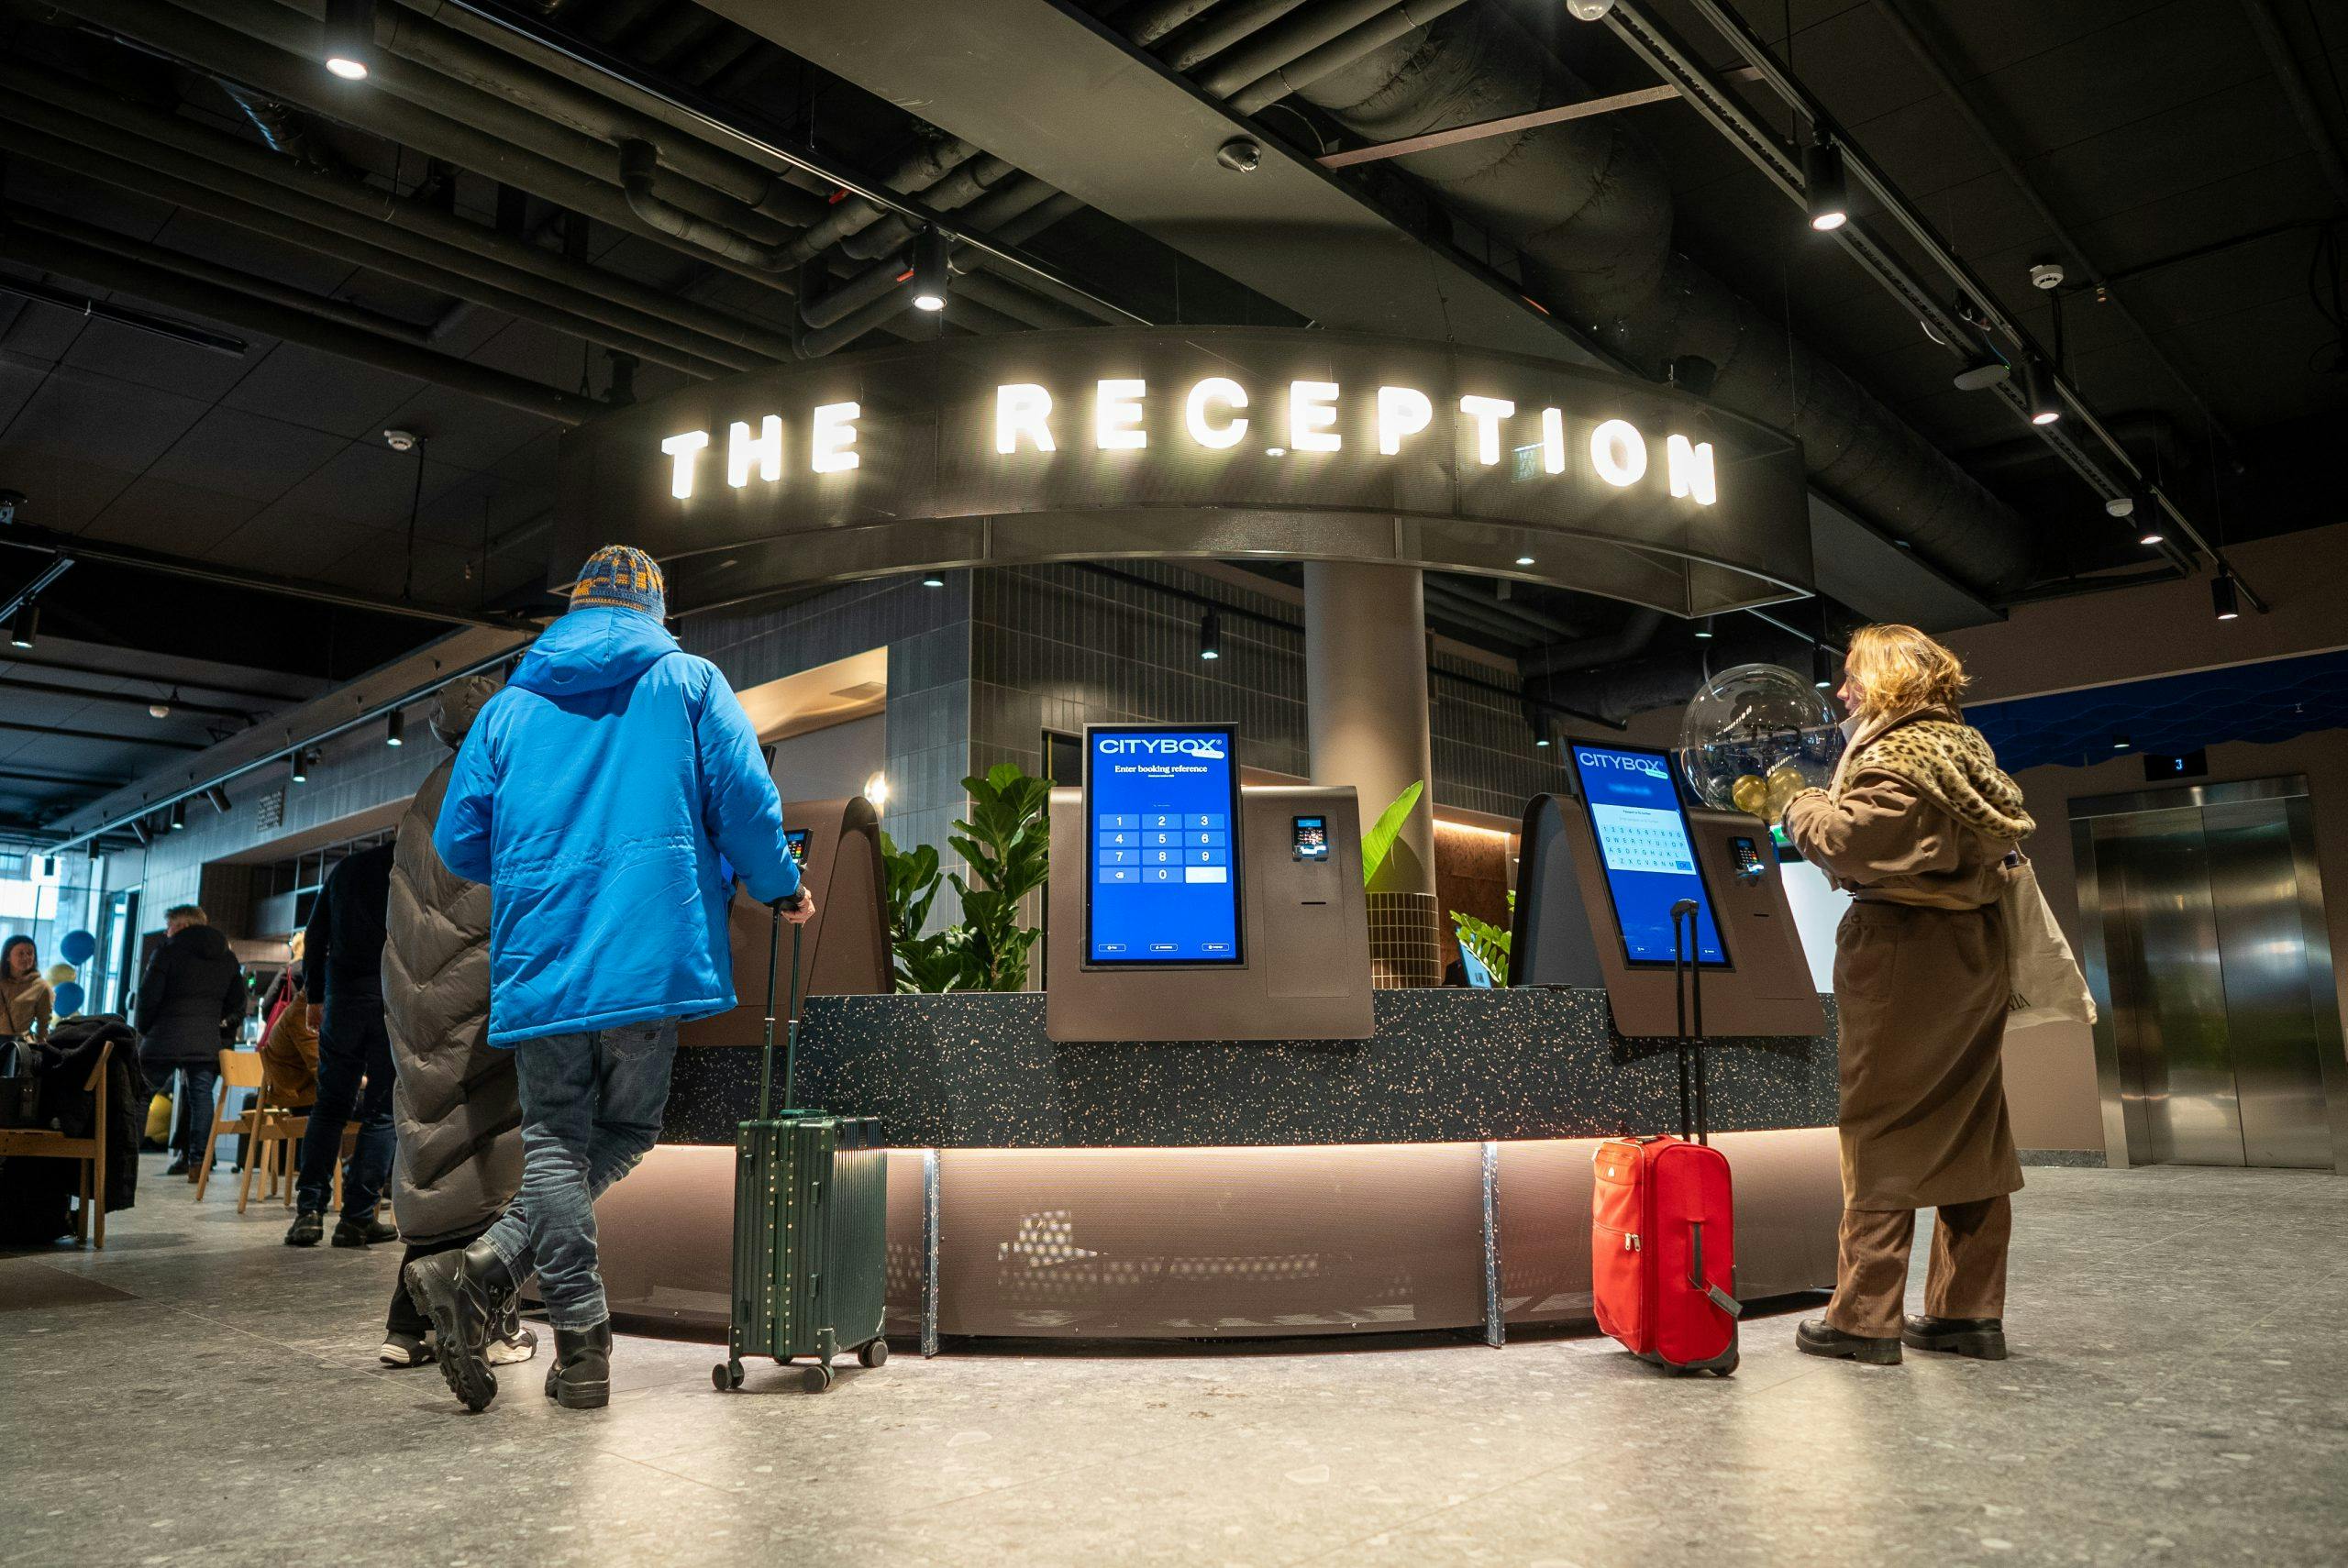 The hotel chain Citybox is launching self-developed check-in terminals in collaboration with tech-company Heisenbug.